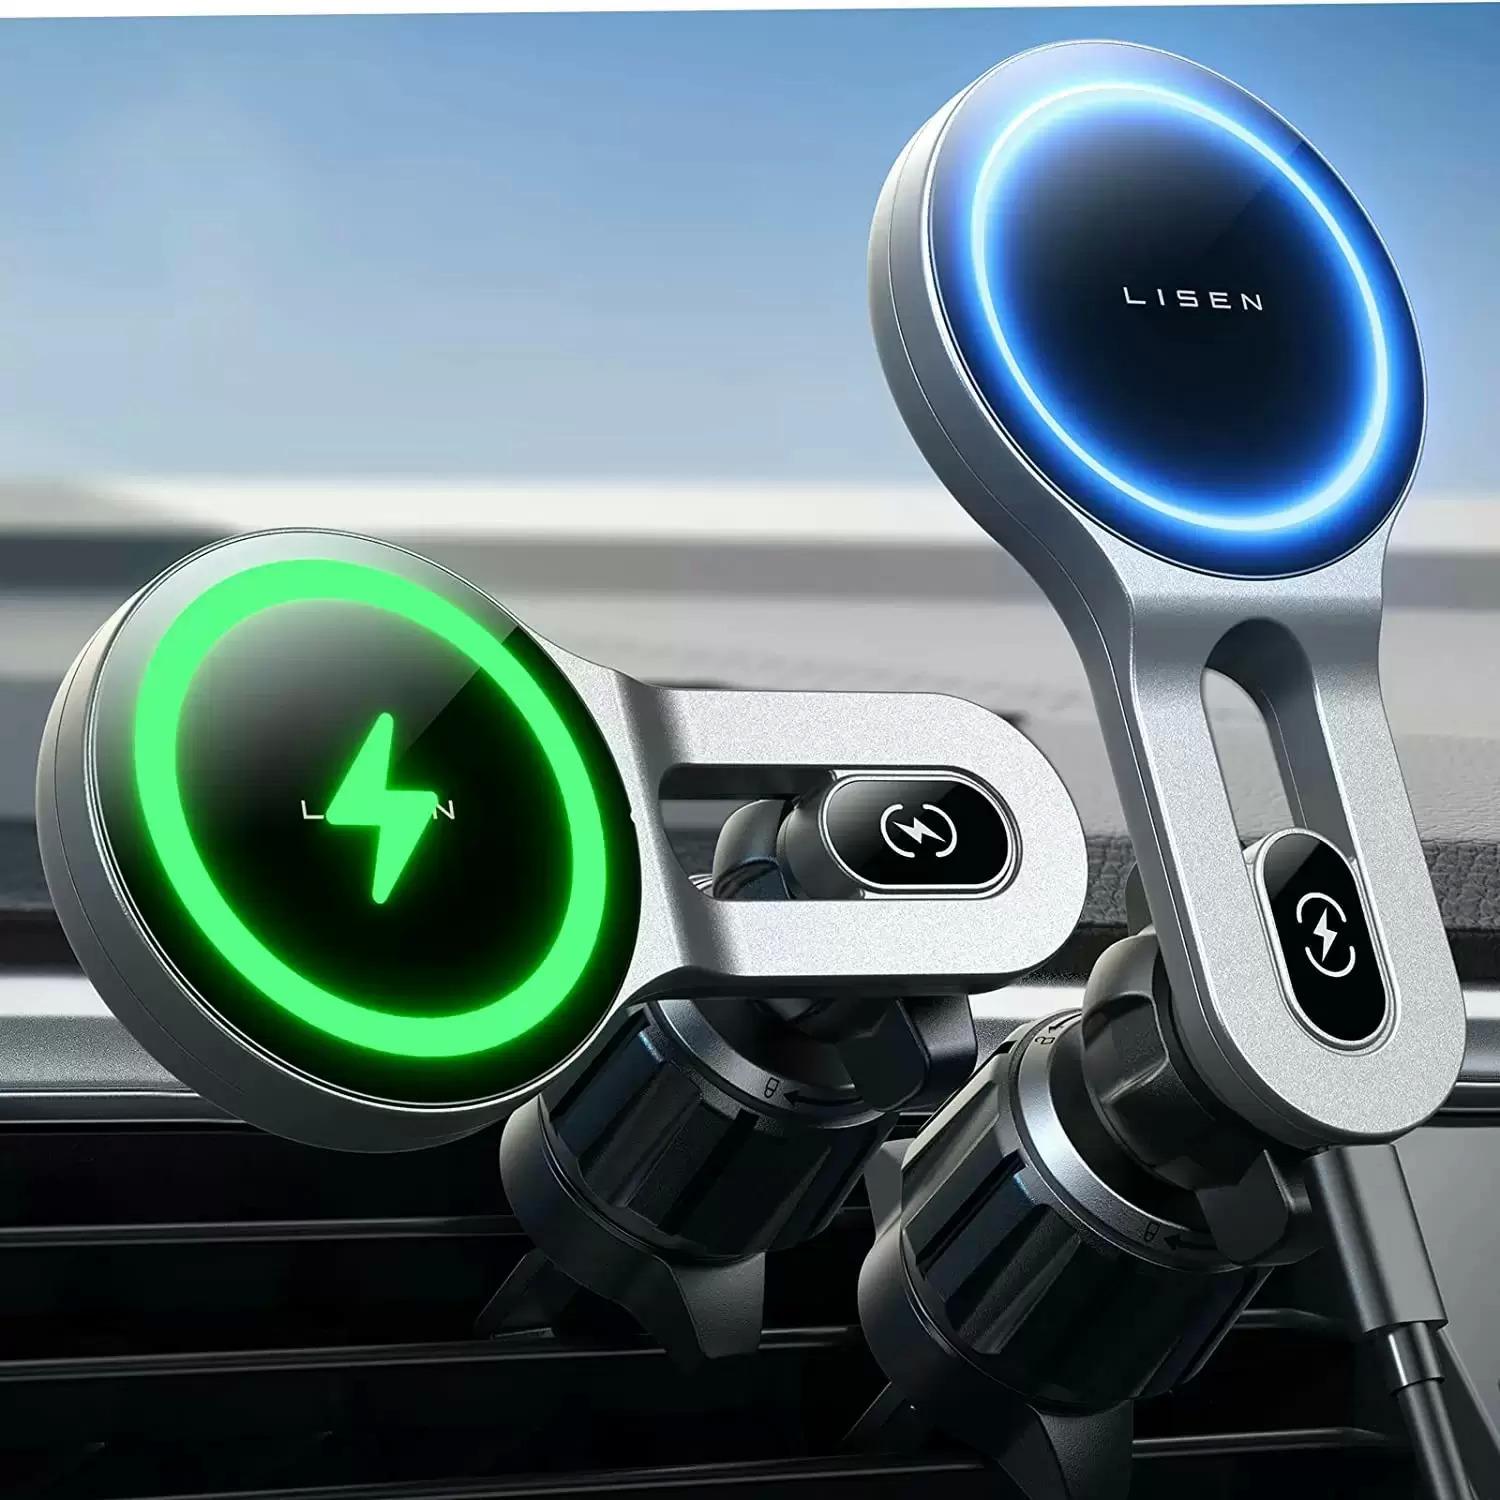 Lisen 15W Wireless MagSafe Phone Car Vent Mount Charger for $17.69